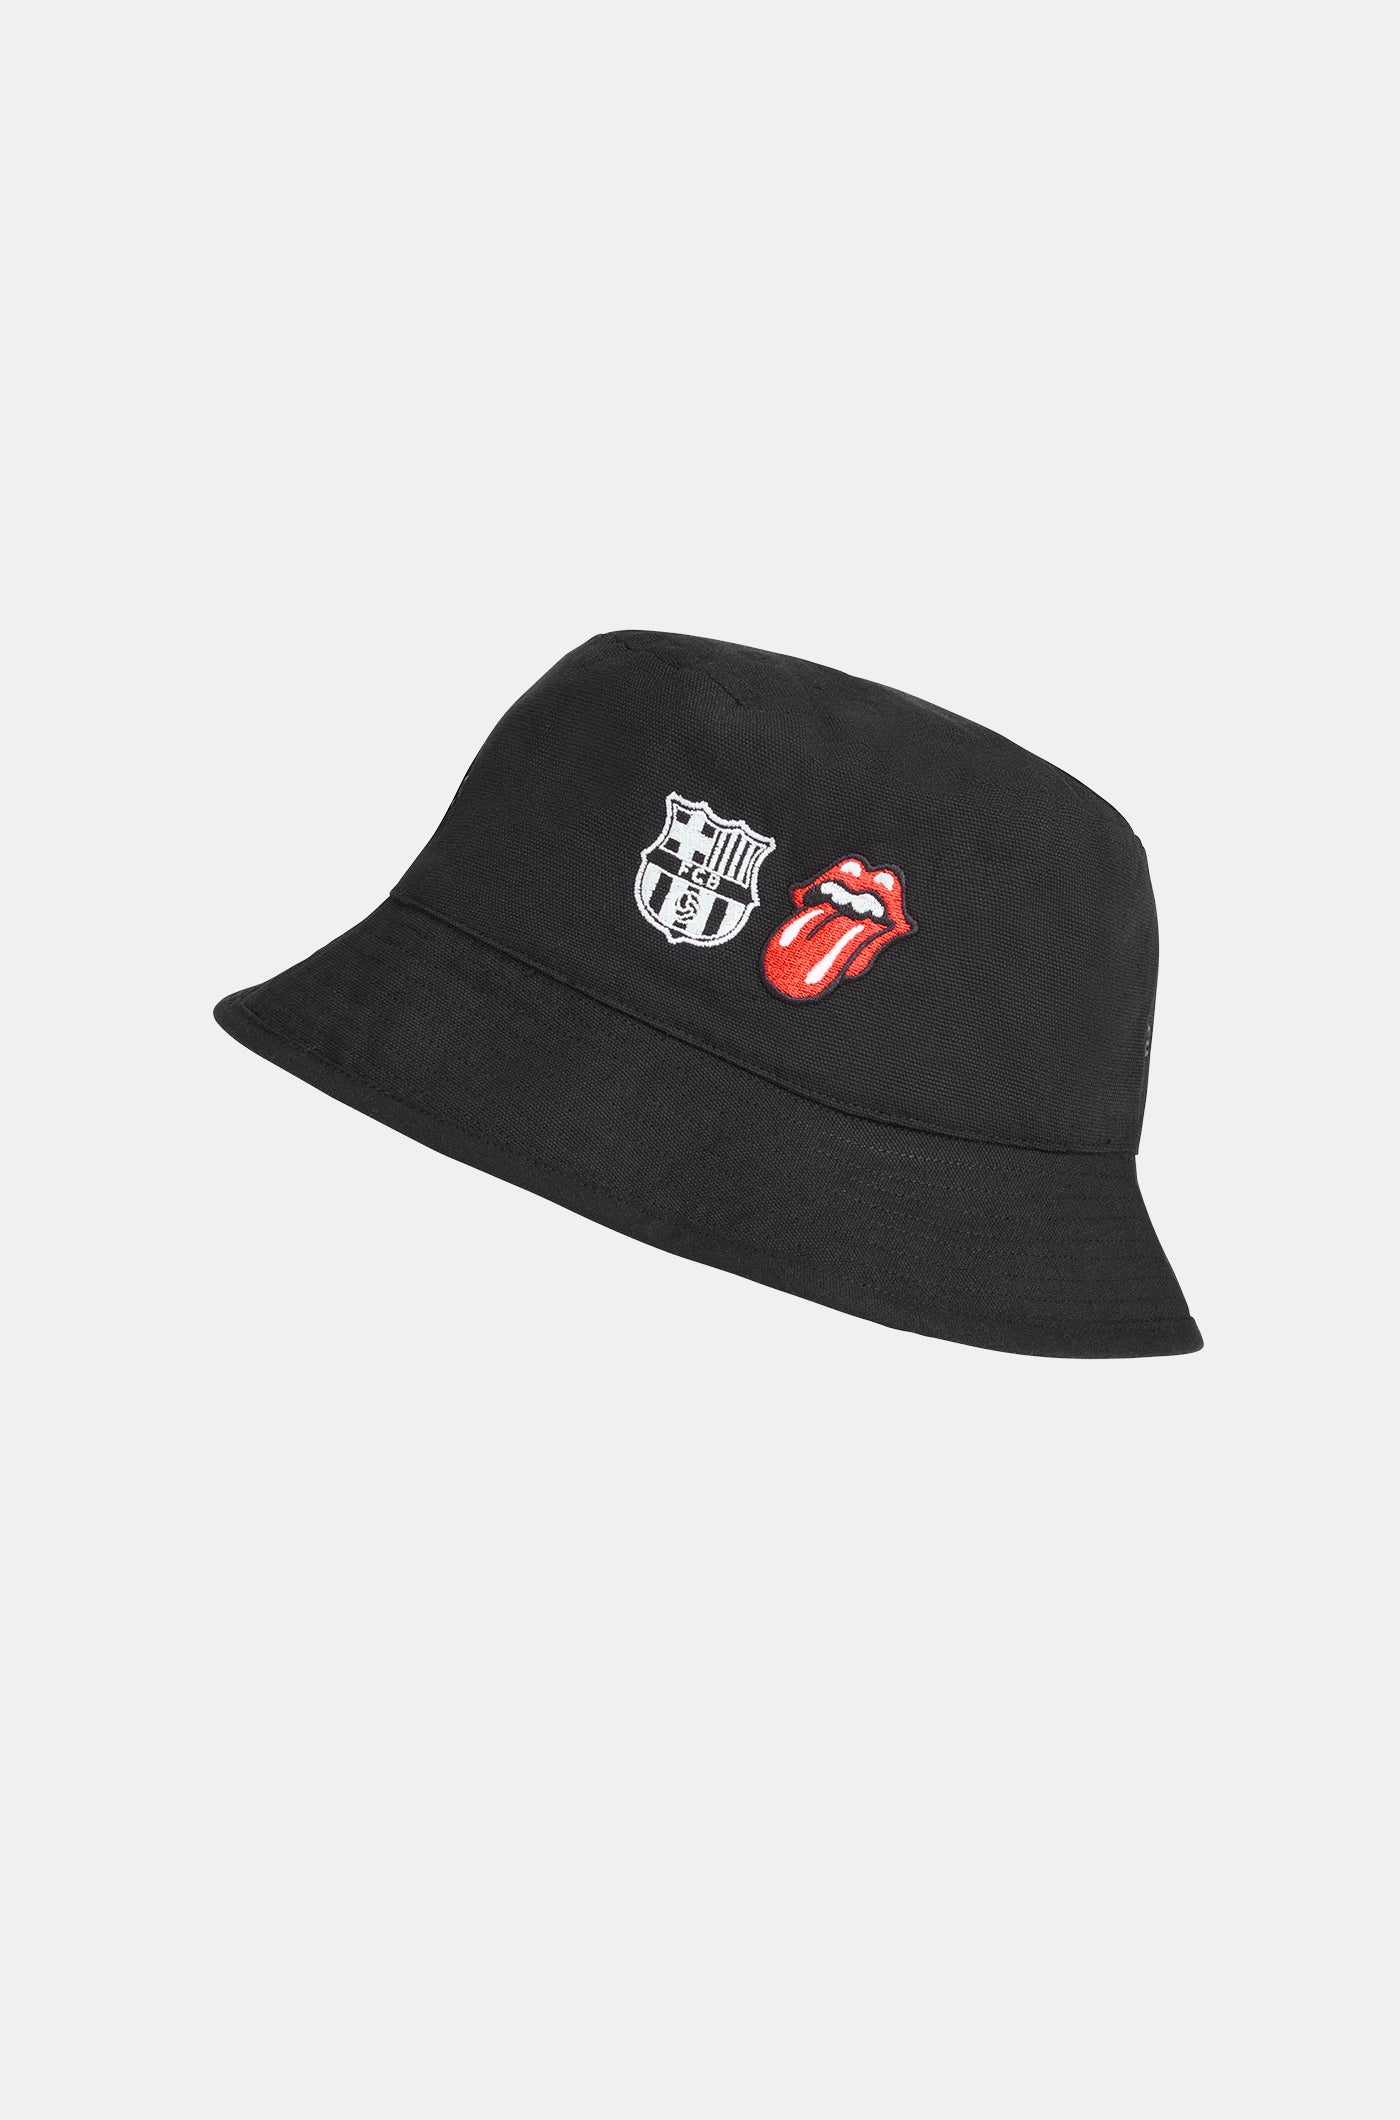 Barça x Rolling Stones limited edition bucket